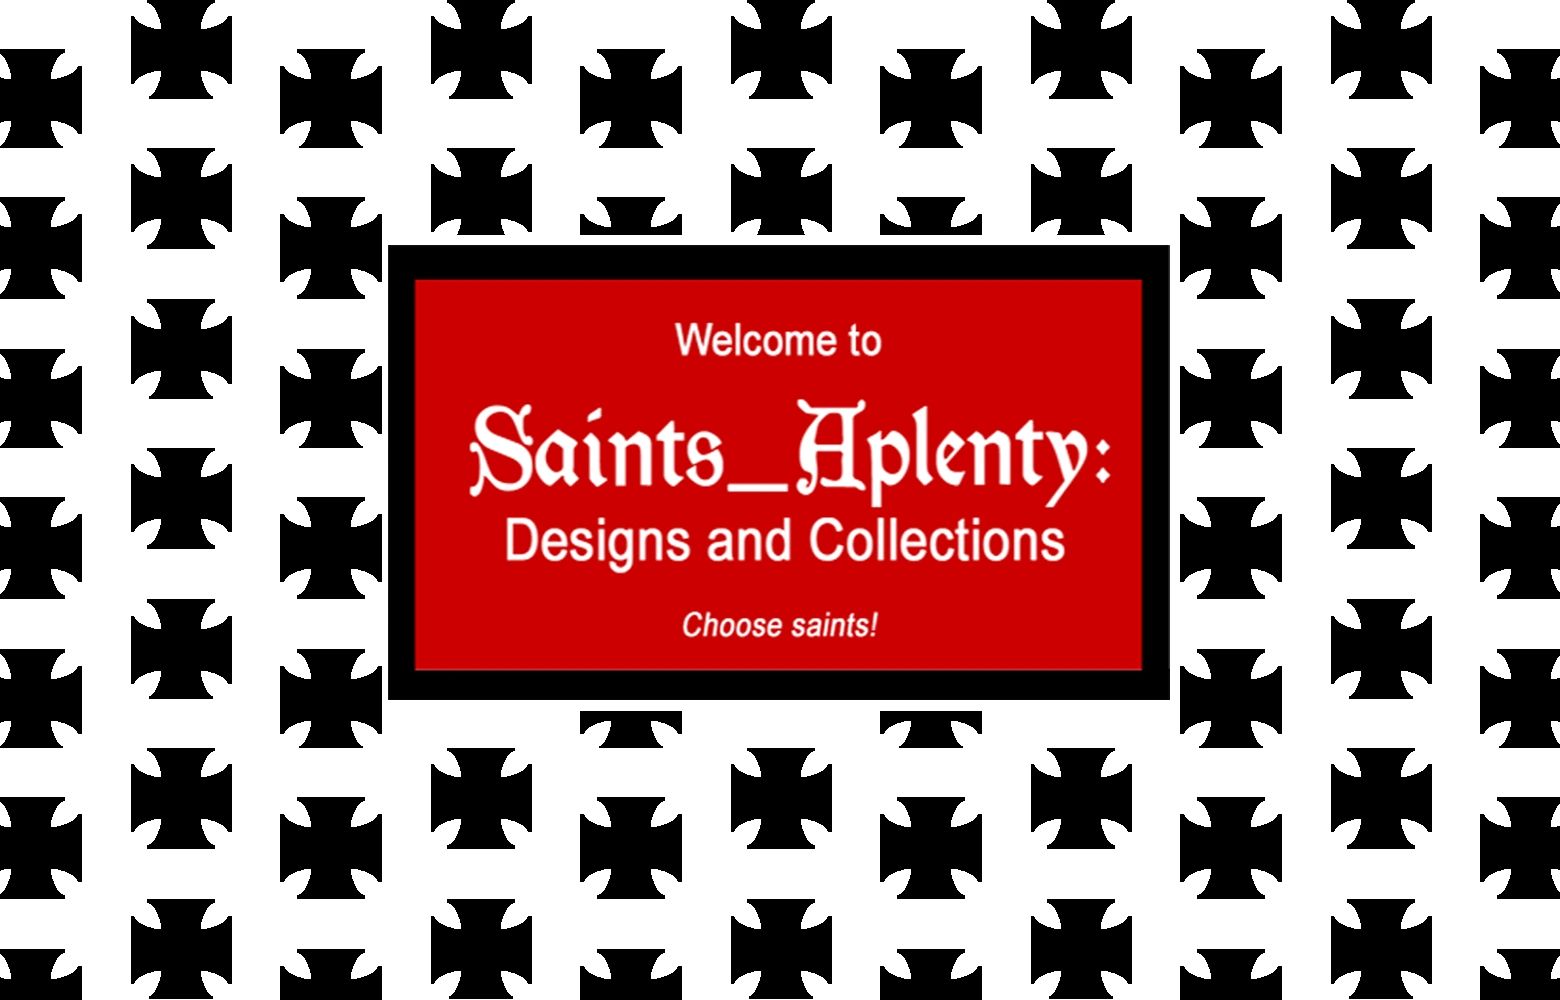 Welcome to Saints_Aplenty:  Designs and Collections + Choose saints!   (Welcome Screen & Motto)